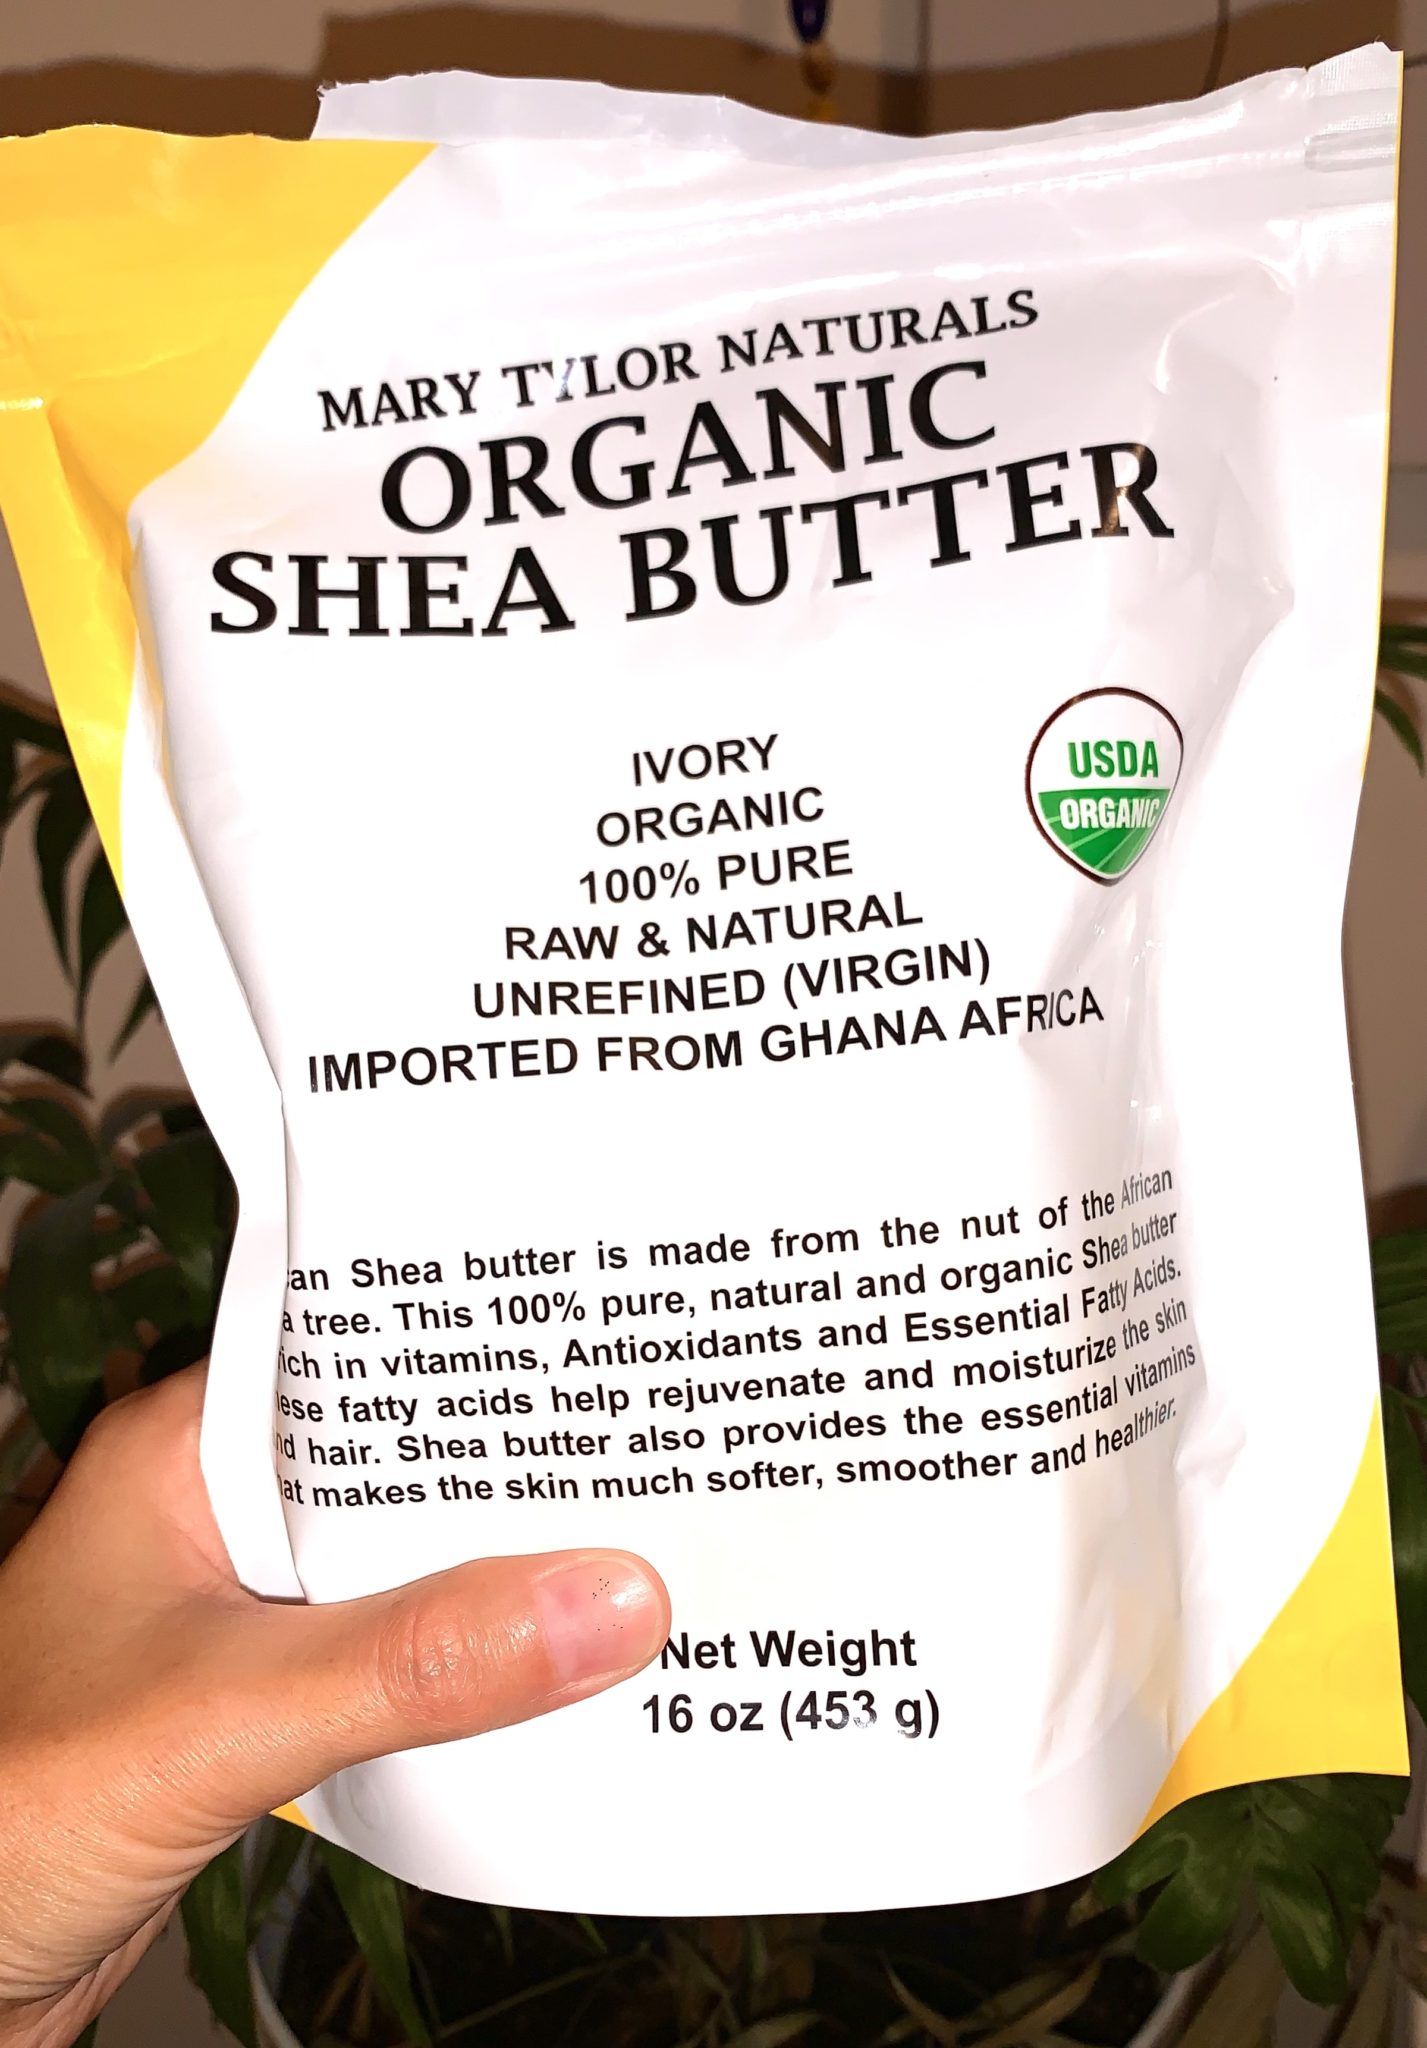 Photo of a hand holding a white and yellow plastic bag of Mary Tylor Naturals' Organic Shea Butter